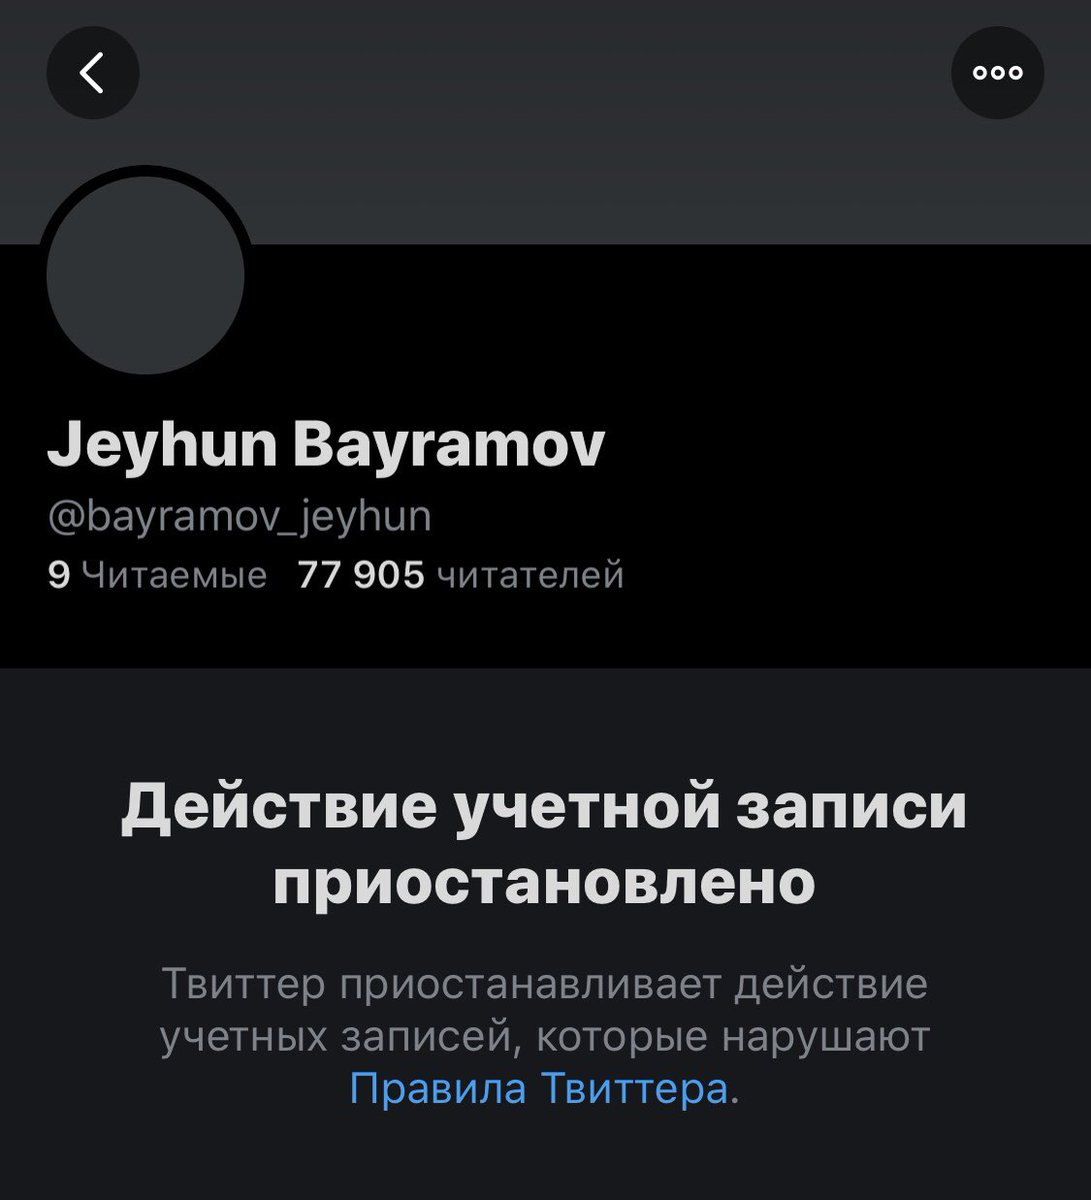 Twitter suspended the Minister of Foreign Affairs of Azerbaijan - Ceyhun Bayramov''s twitter account. @Twitter you should really review your values and company's policy, and definitely add double standards! #CensorshipIsReal #Twitterisbiased